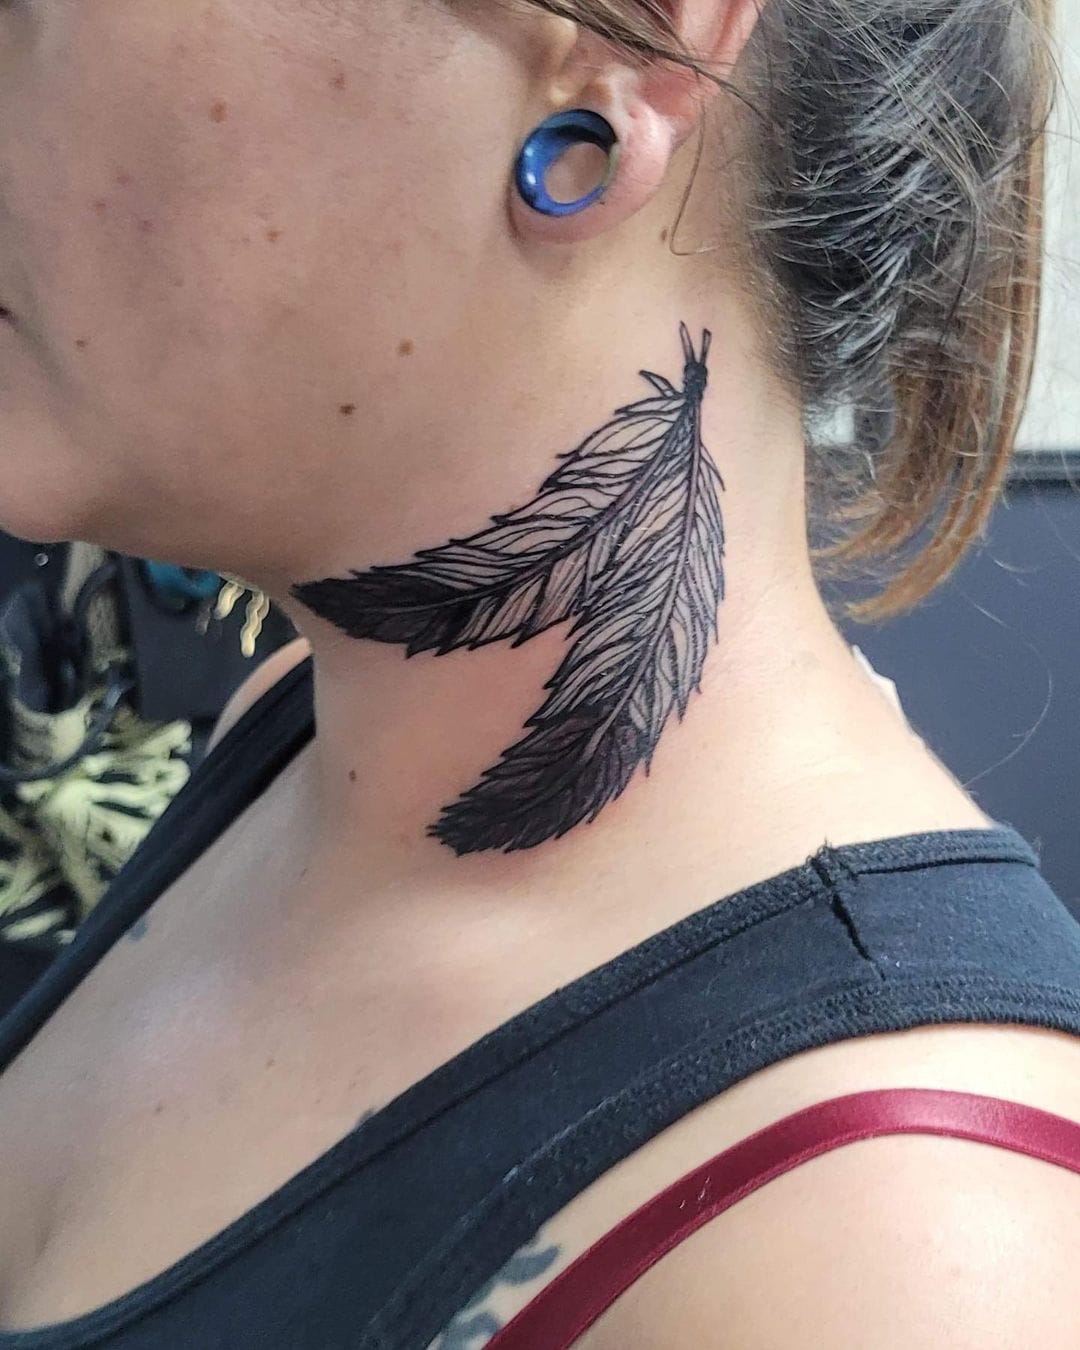 Tattoo uploaded by Sonia • I would love this one on my upper back and neck  #megandreamtattoo • Tattoodo